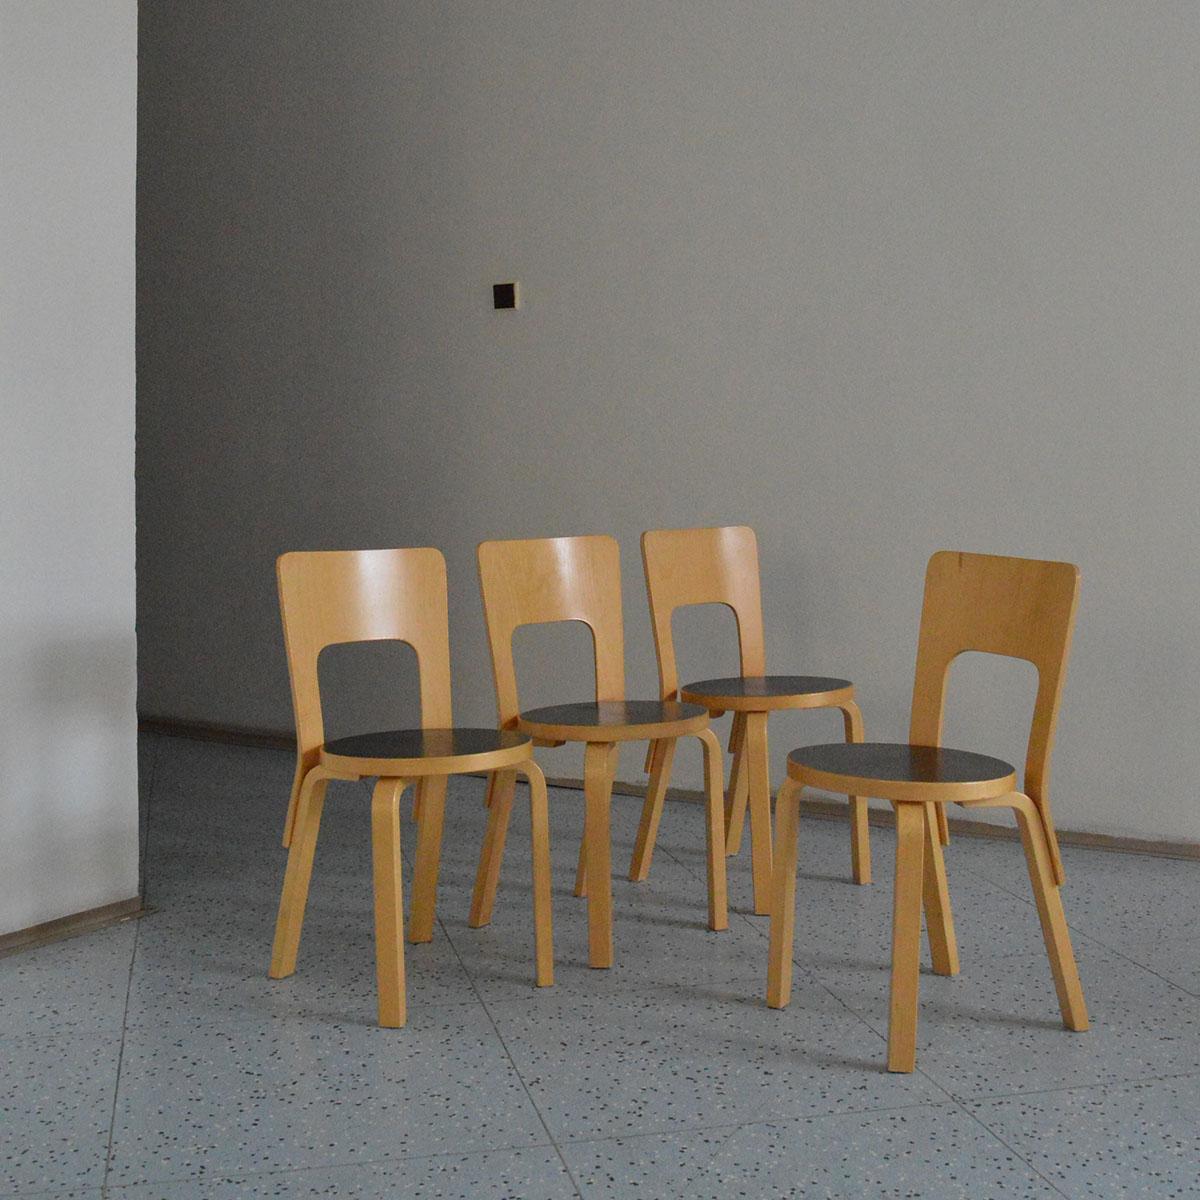 Dining set of four chairs in birch, model 66, designed by Alvar Aalto and manufactured by Artek in Finland, 1980s. 

These chairs are part of the iconic 66 Chair series designed by the renowned Finnish architect and designer Alvar Aalto and